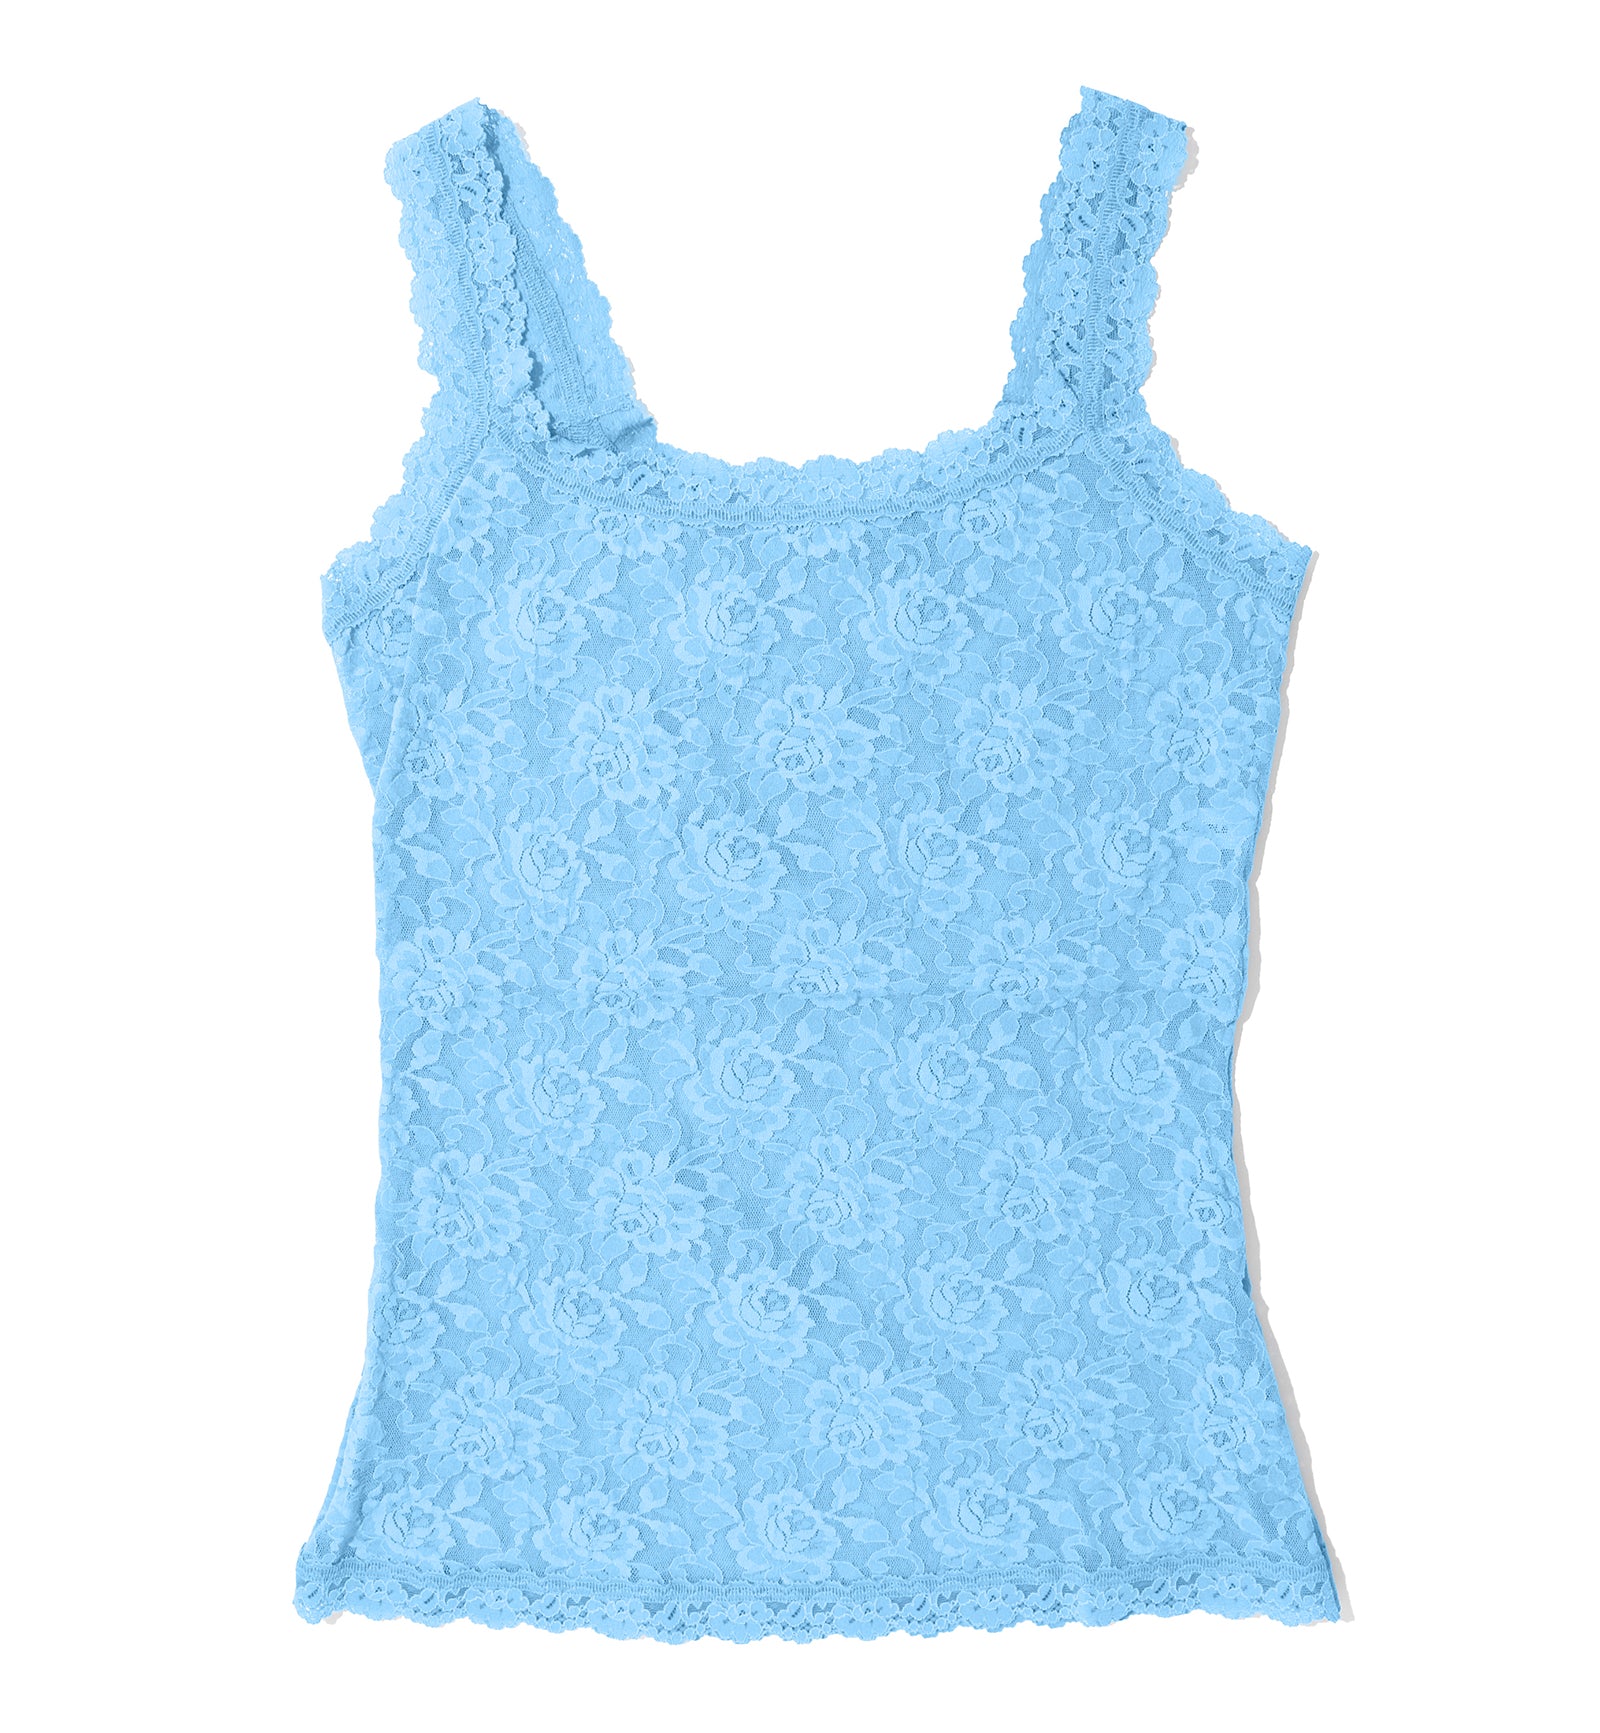 Hanky Panky Signature Lace Unlined Camisole (1390LP),XS,Partly Cloudy - Partly Cloudy,XS